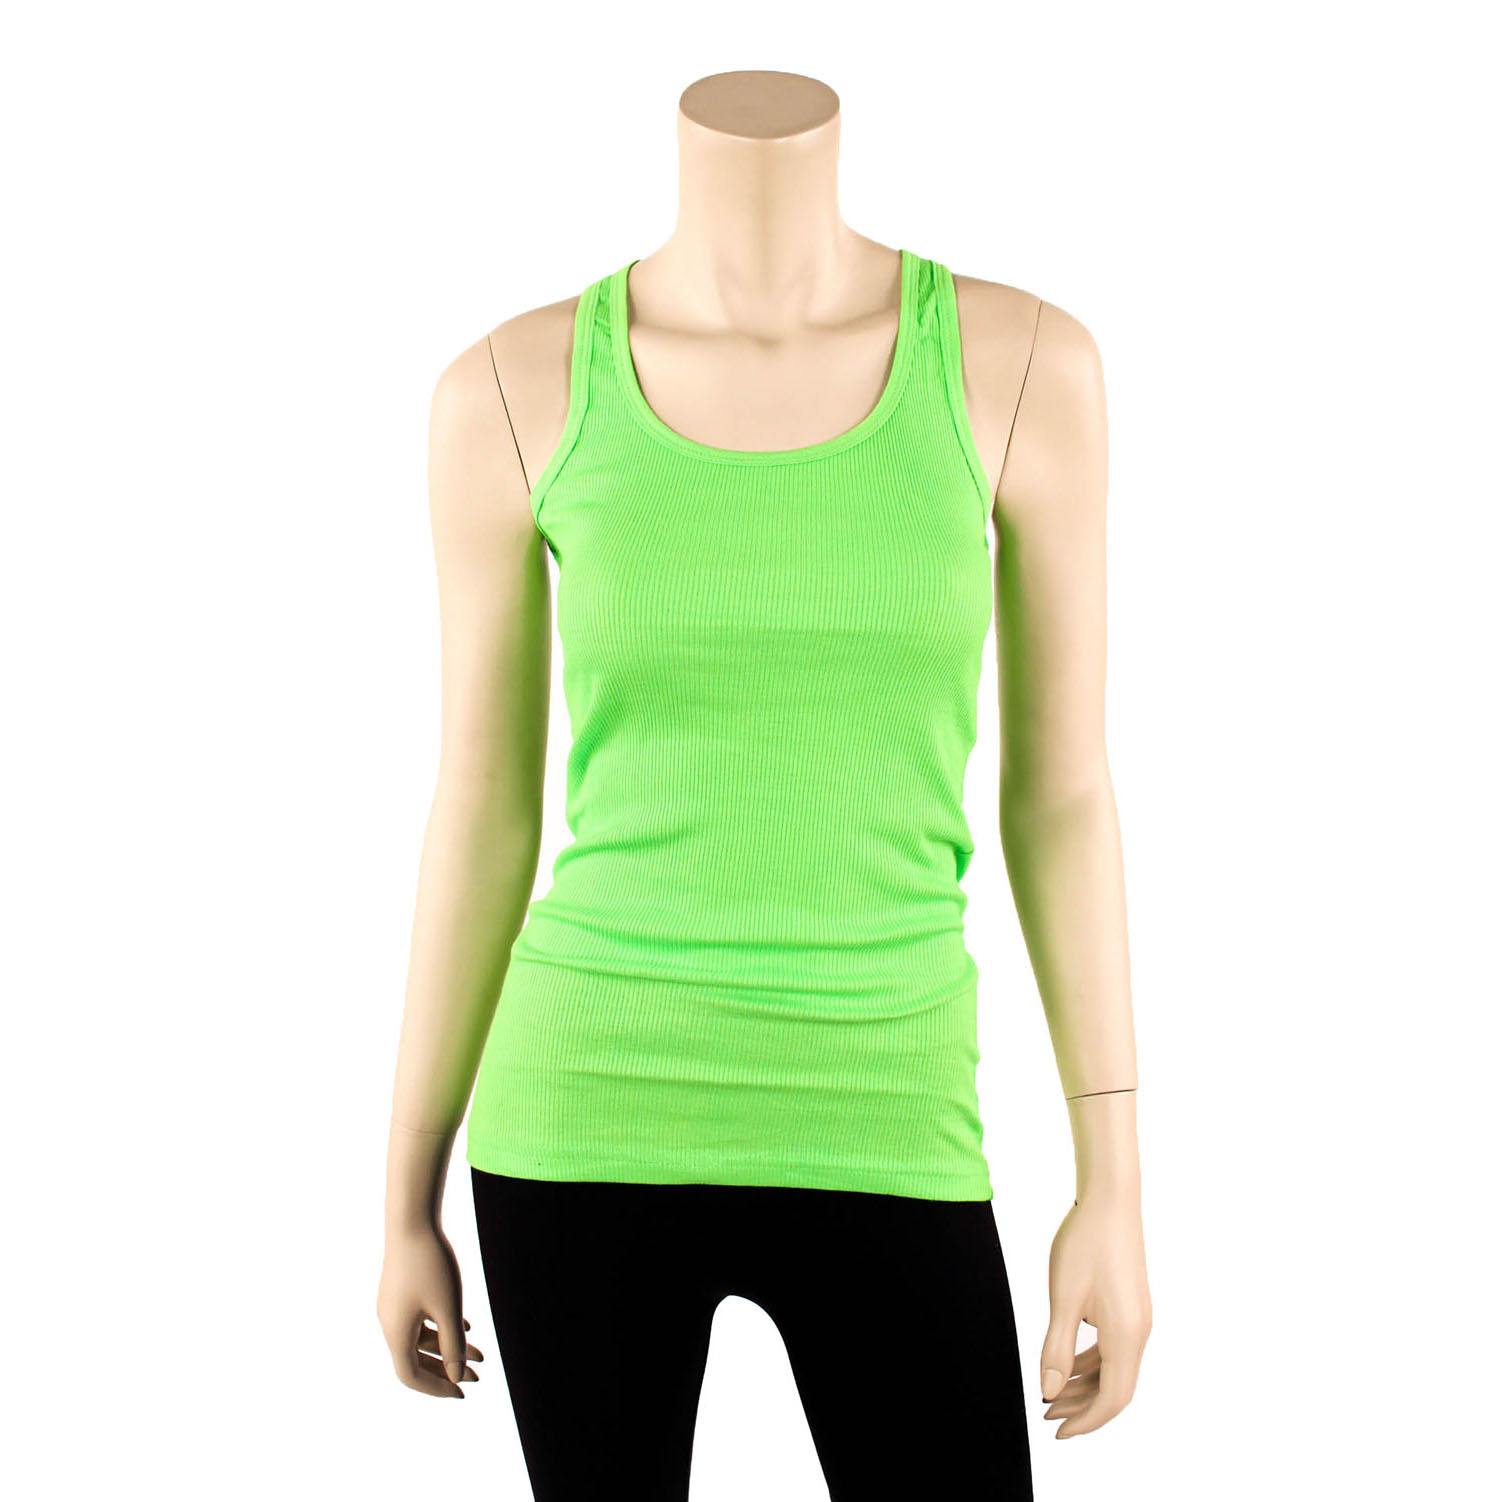 Womens Tank Top 100% Cotton Heavy Weight Ribbed A-Shirt Basic Workout S ...